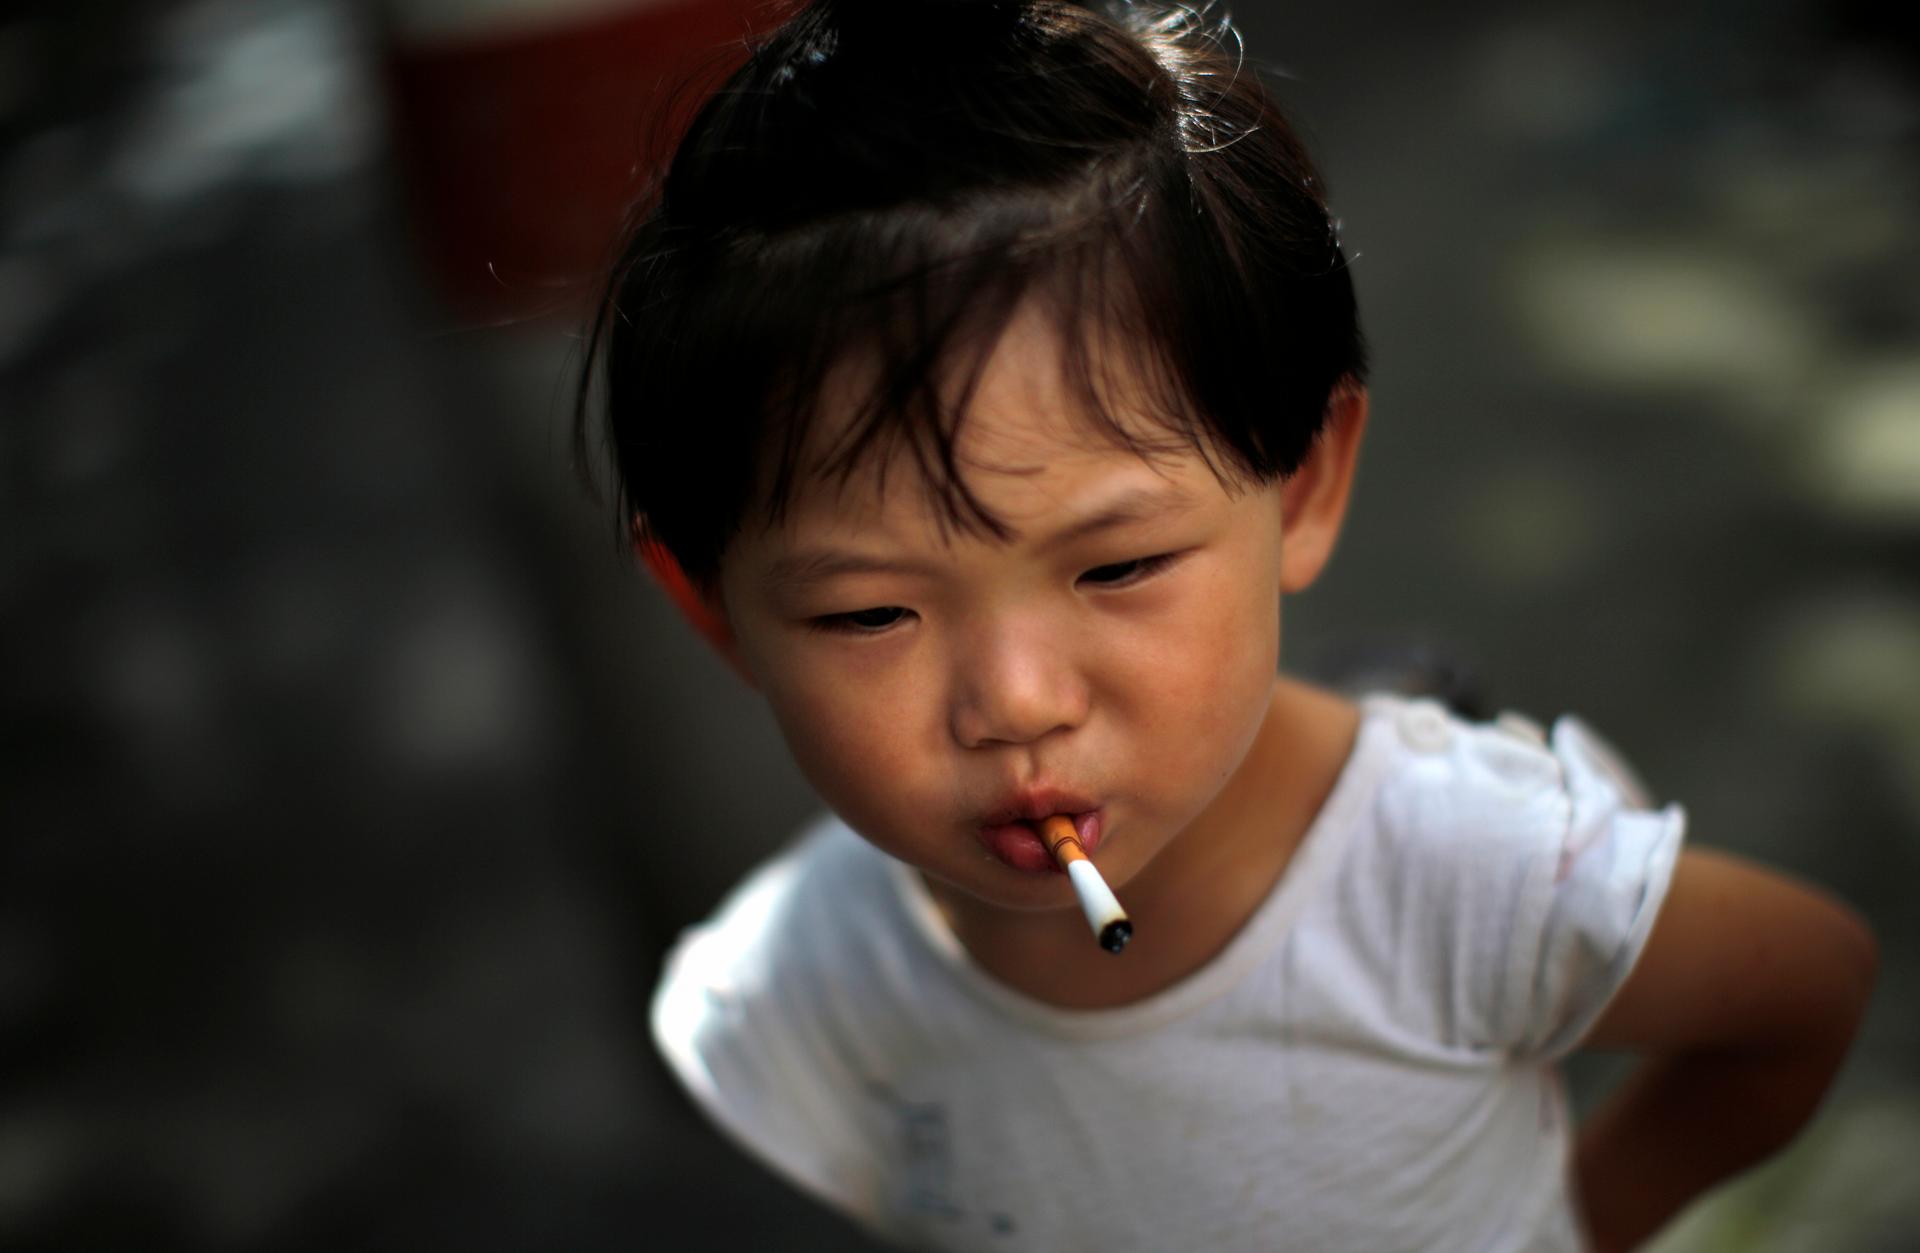 A small girl holds an unlit cigarette in her mouth